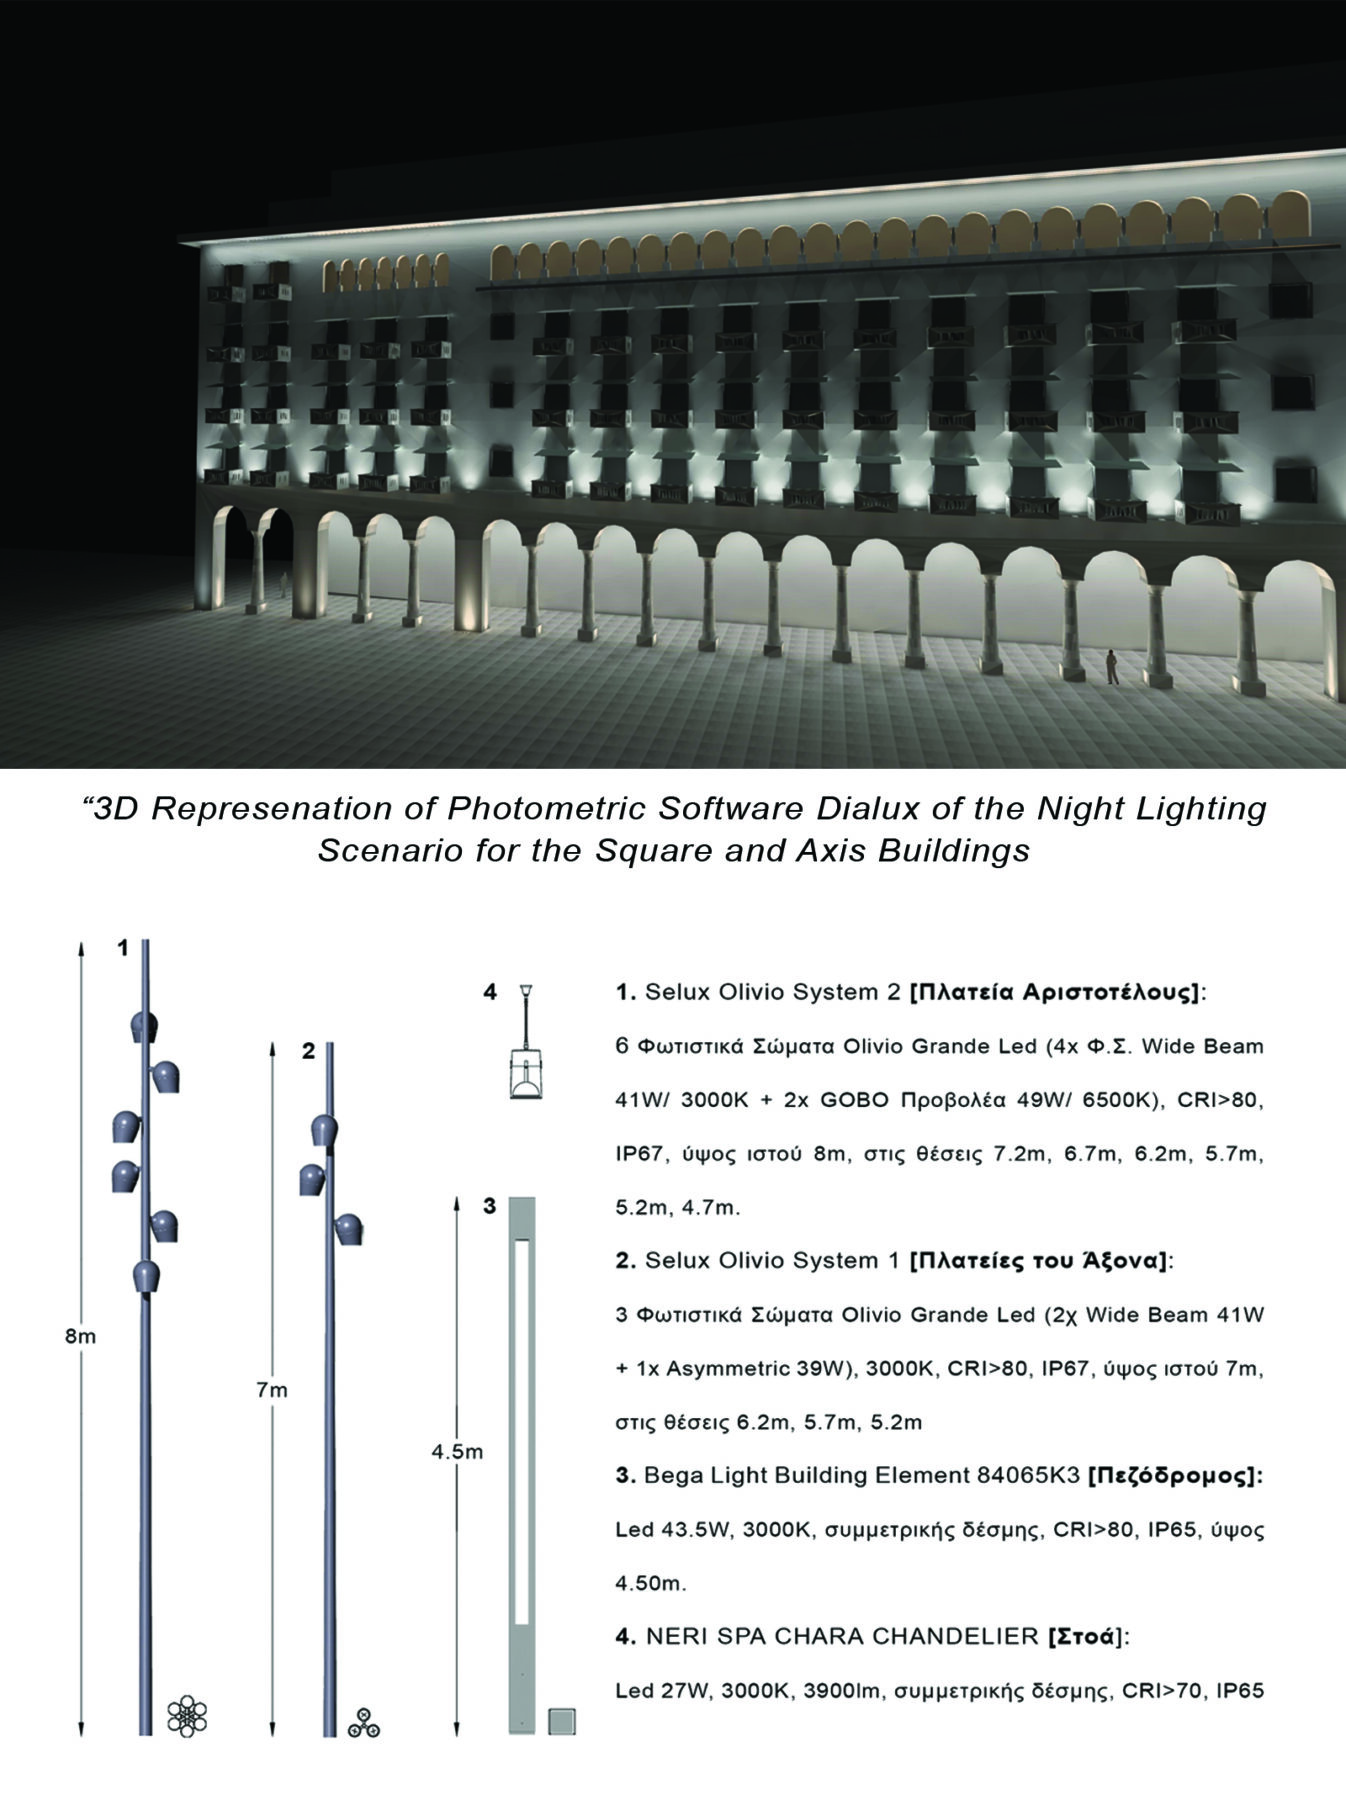 Archisearch WEAVE: architect E. Karyoti in collaboration with architect E. Samara, electrical engineer A. Sivi, civil engineer P. Zervas and architecture students F. Georgiadis, E. Antoniadou, E. Lazarina & S. Grigoropoulos win 3rd prize at the open Architectural Competition “Redesign of Aritsotelous Square and Axis”